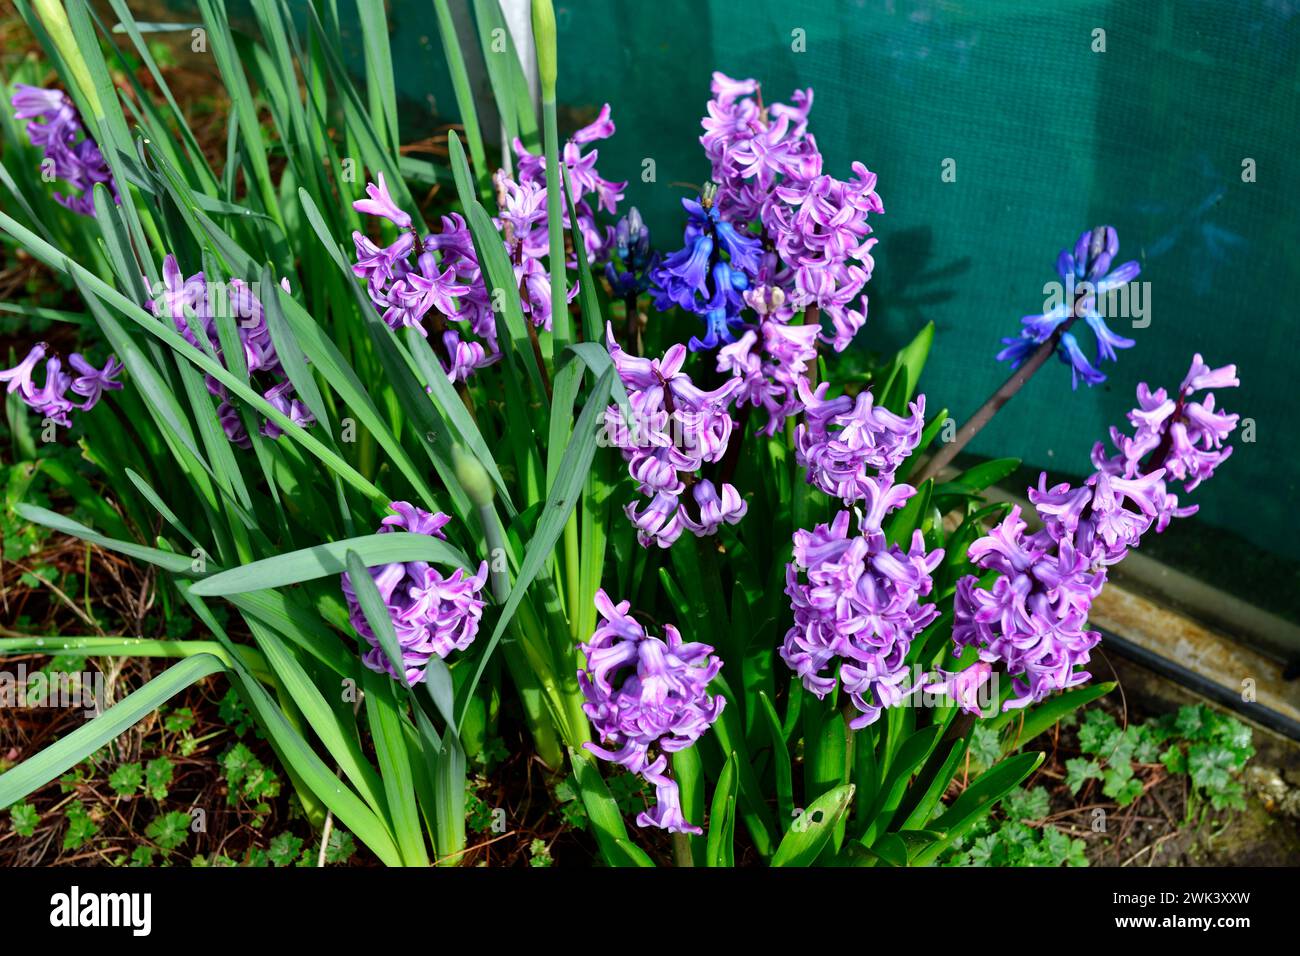 Hyacinth ( hyacinthus) Flowers in the Back Garden Somerset Inghilterra regno unito Foto Stock